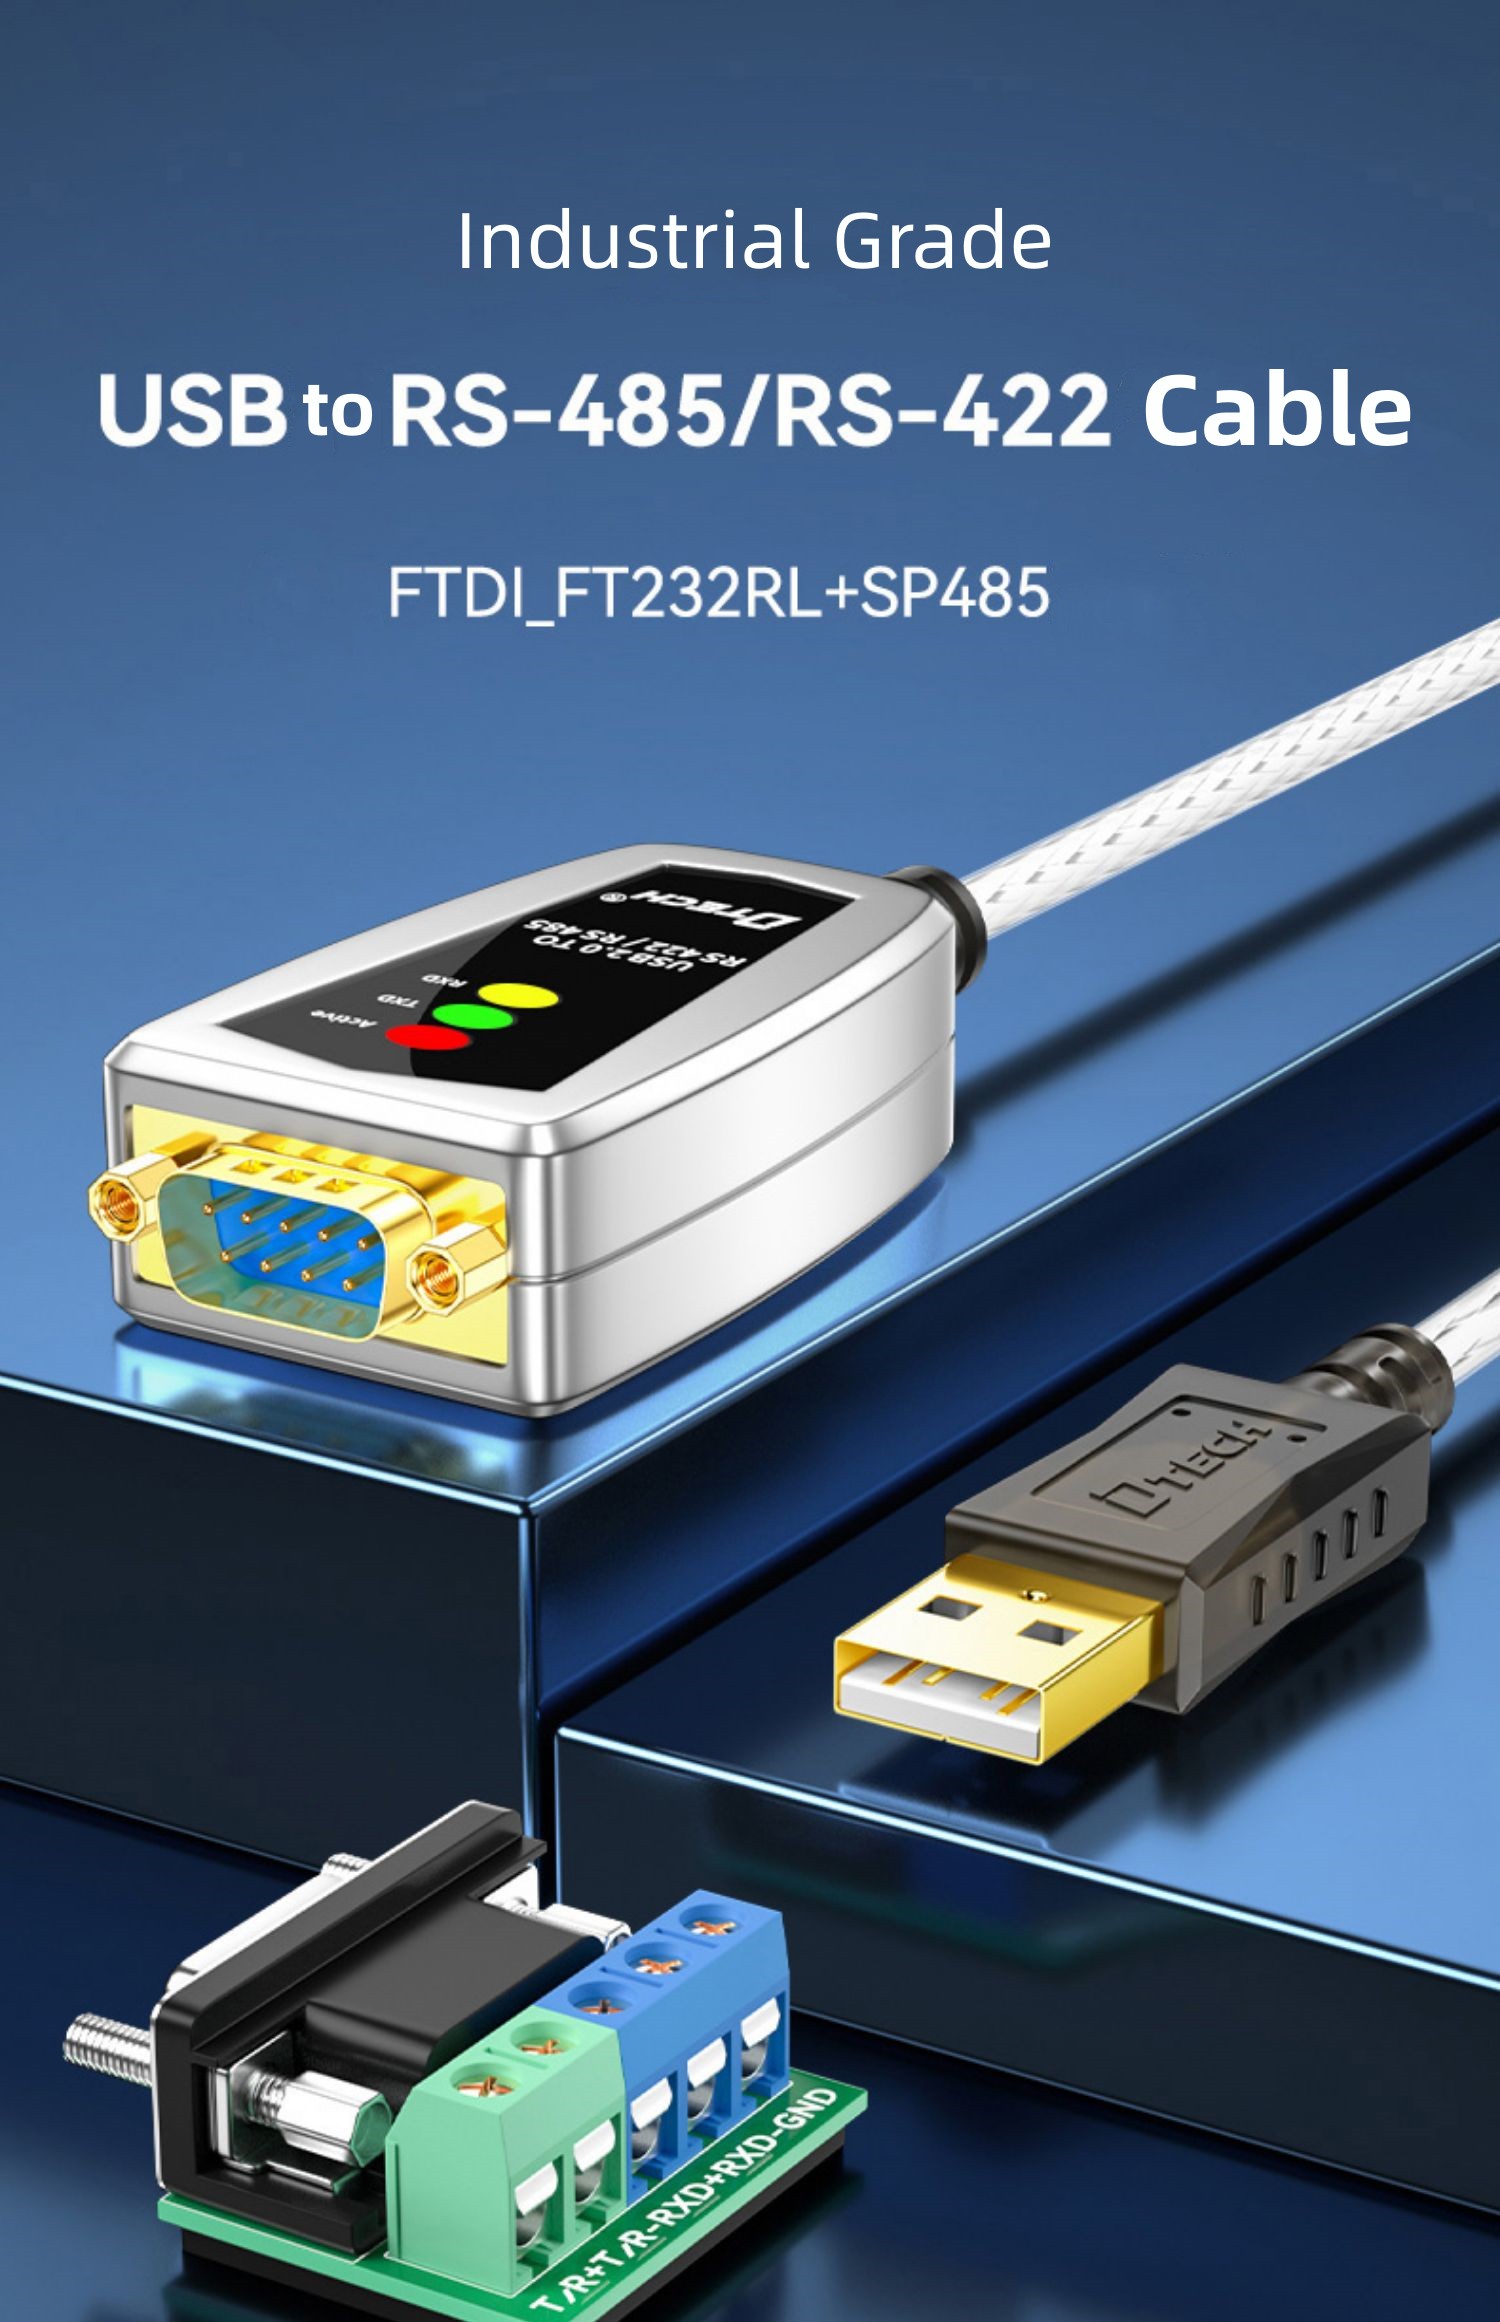 USB2.0 to RS422/485 Cable